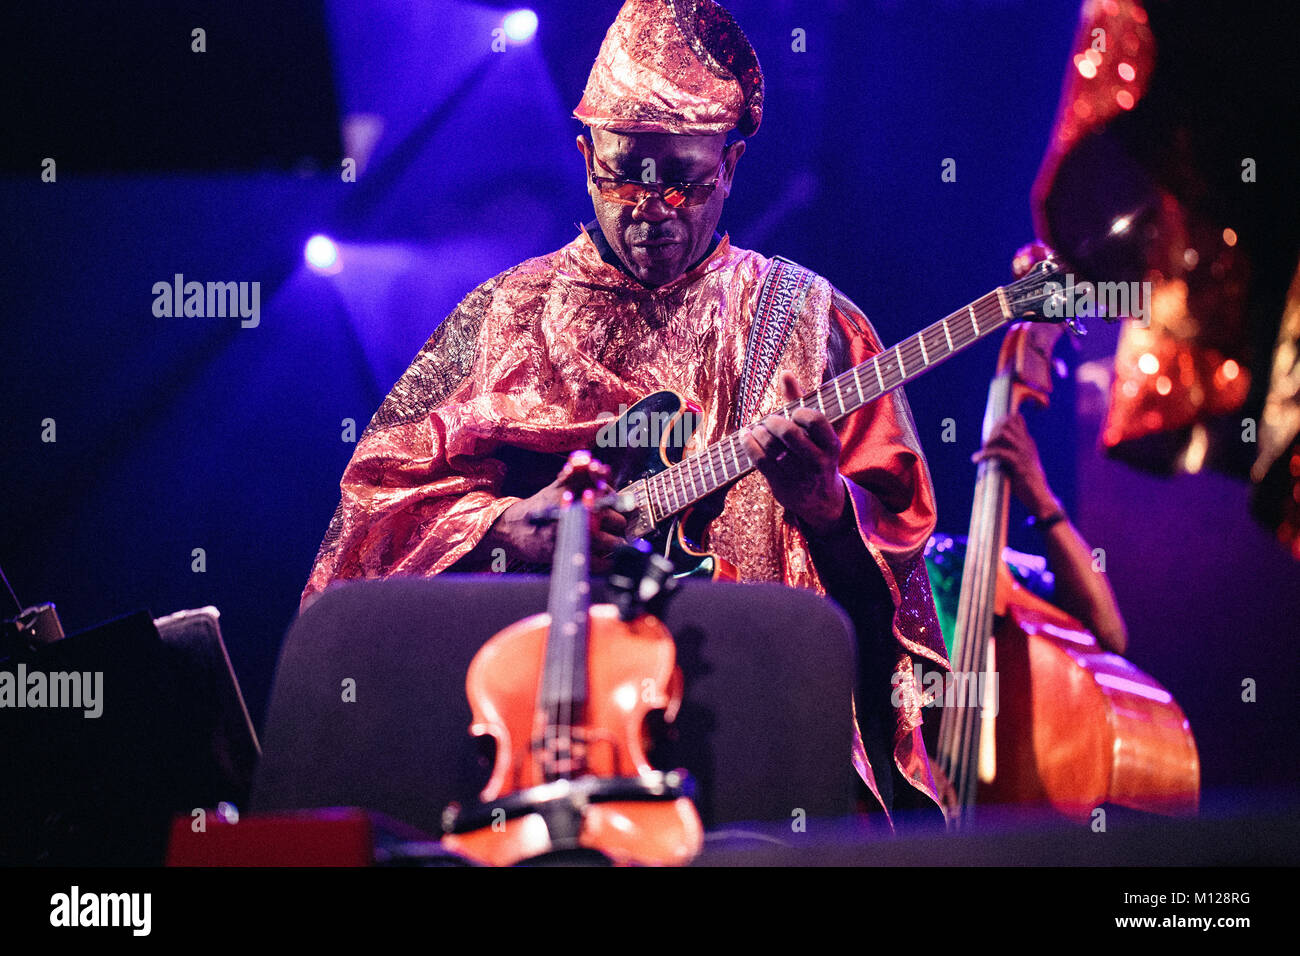 The American avant-garde jazz group Sun Ra Arkestra performs a live concert at the Polish music festival Off Festival 2015 in Katowice. Here guitarist Dave Hotep is pictured live on stage. Poland, 08/08 2015. Stock Photo